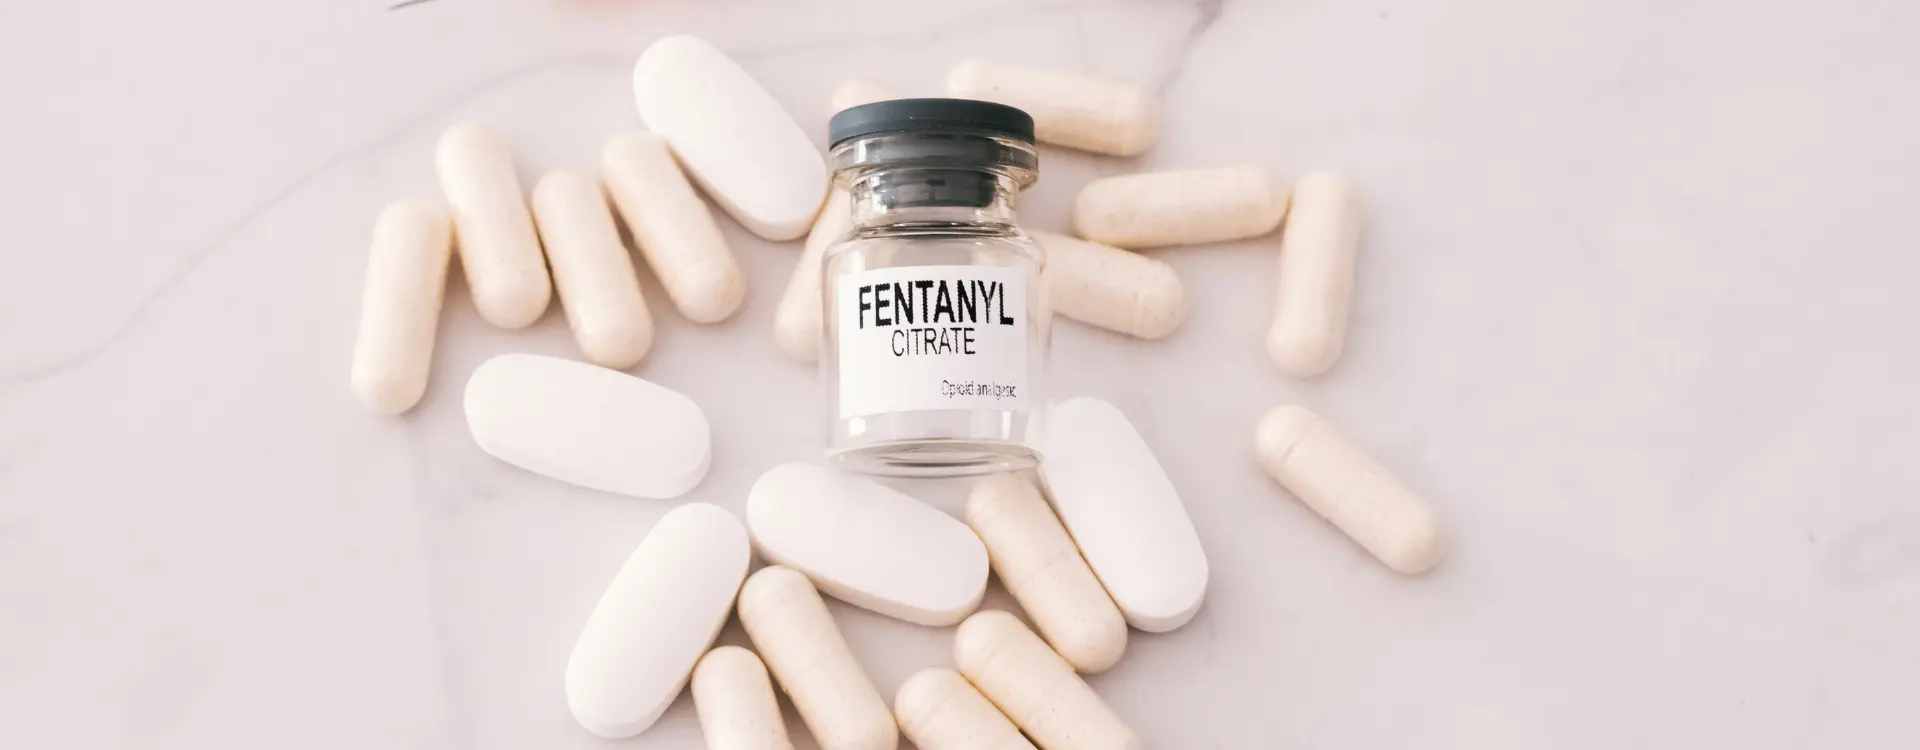 fentanyl laced pills case